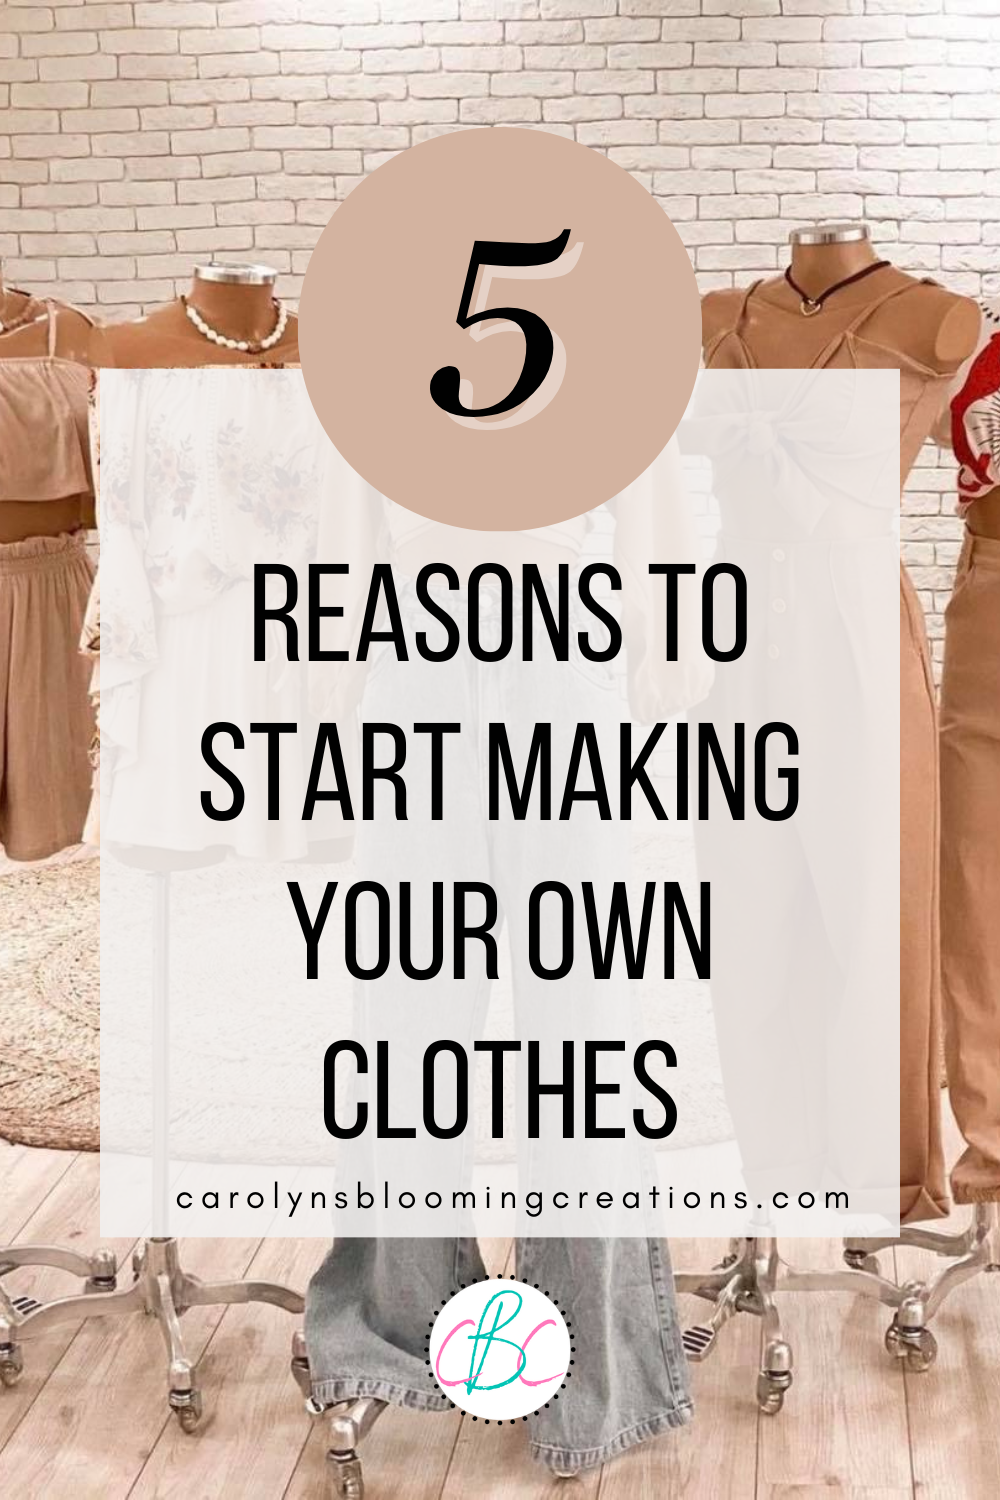 Getting Started: Making Your Own Clothes